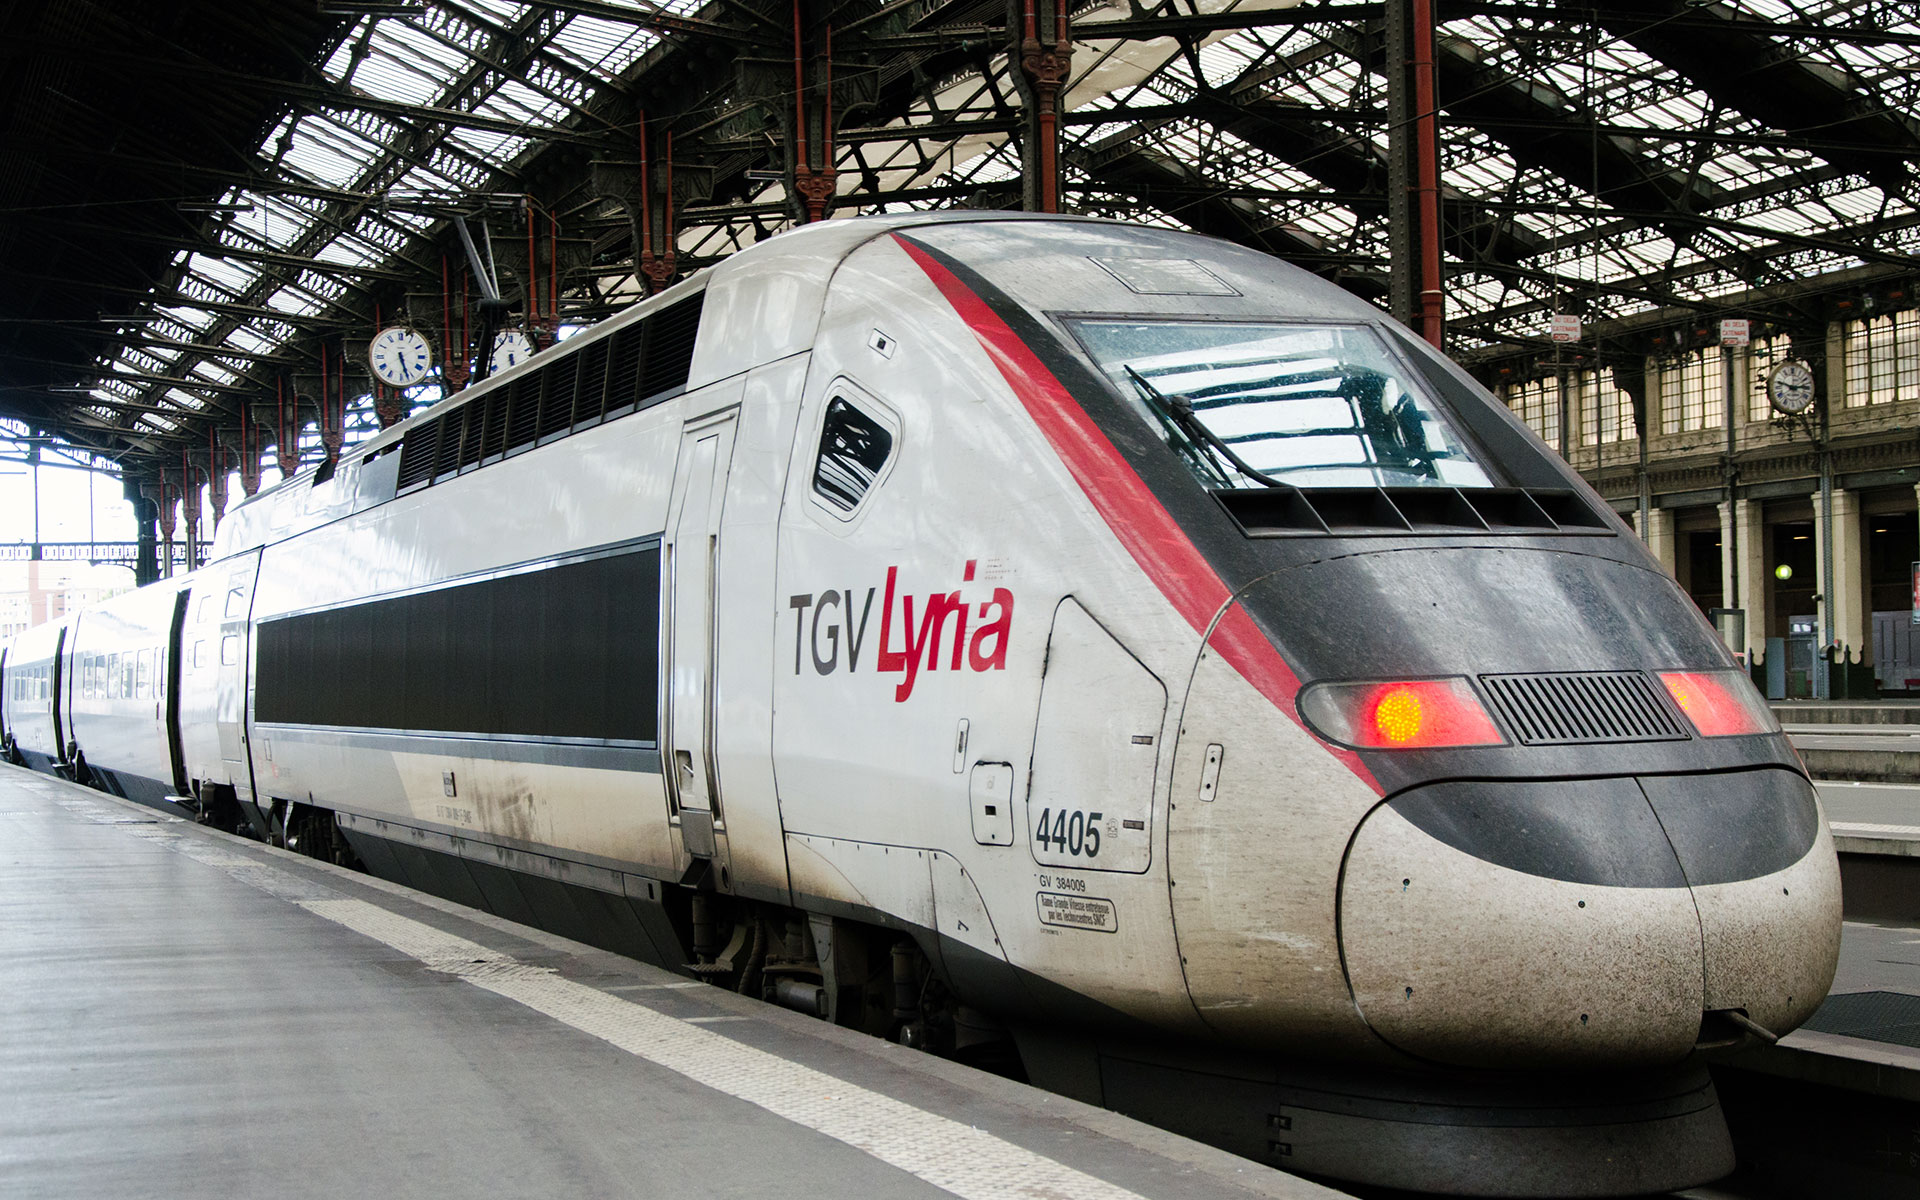 TGV Lyria trains from Paris to Switzerland can now be booked four months in advance (photo © Yinglina / dreamstime.com)